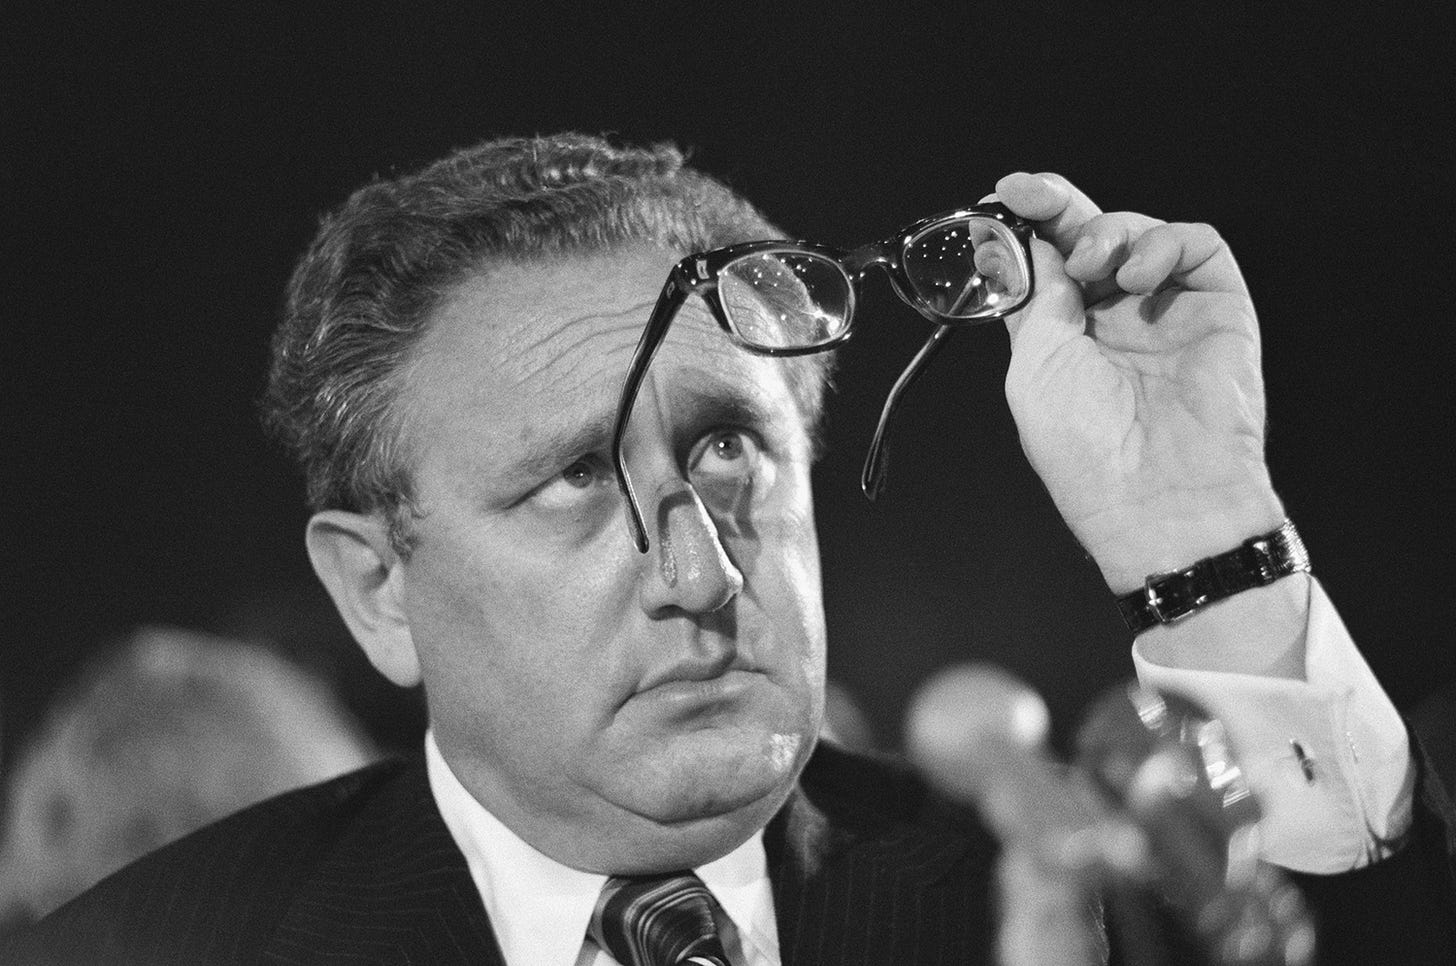 U.S. Secretary of State Henry Kissinger appears before the Senate Appropriations Committee in Washington on April 15, 1975, to urge approval of President Gerald Ford's request for military and humanitarian aid to South Vietnam.